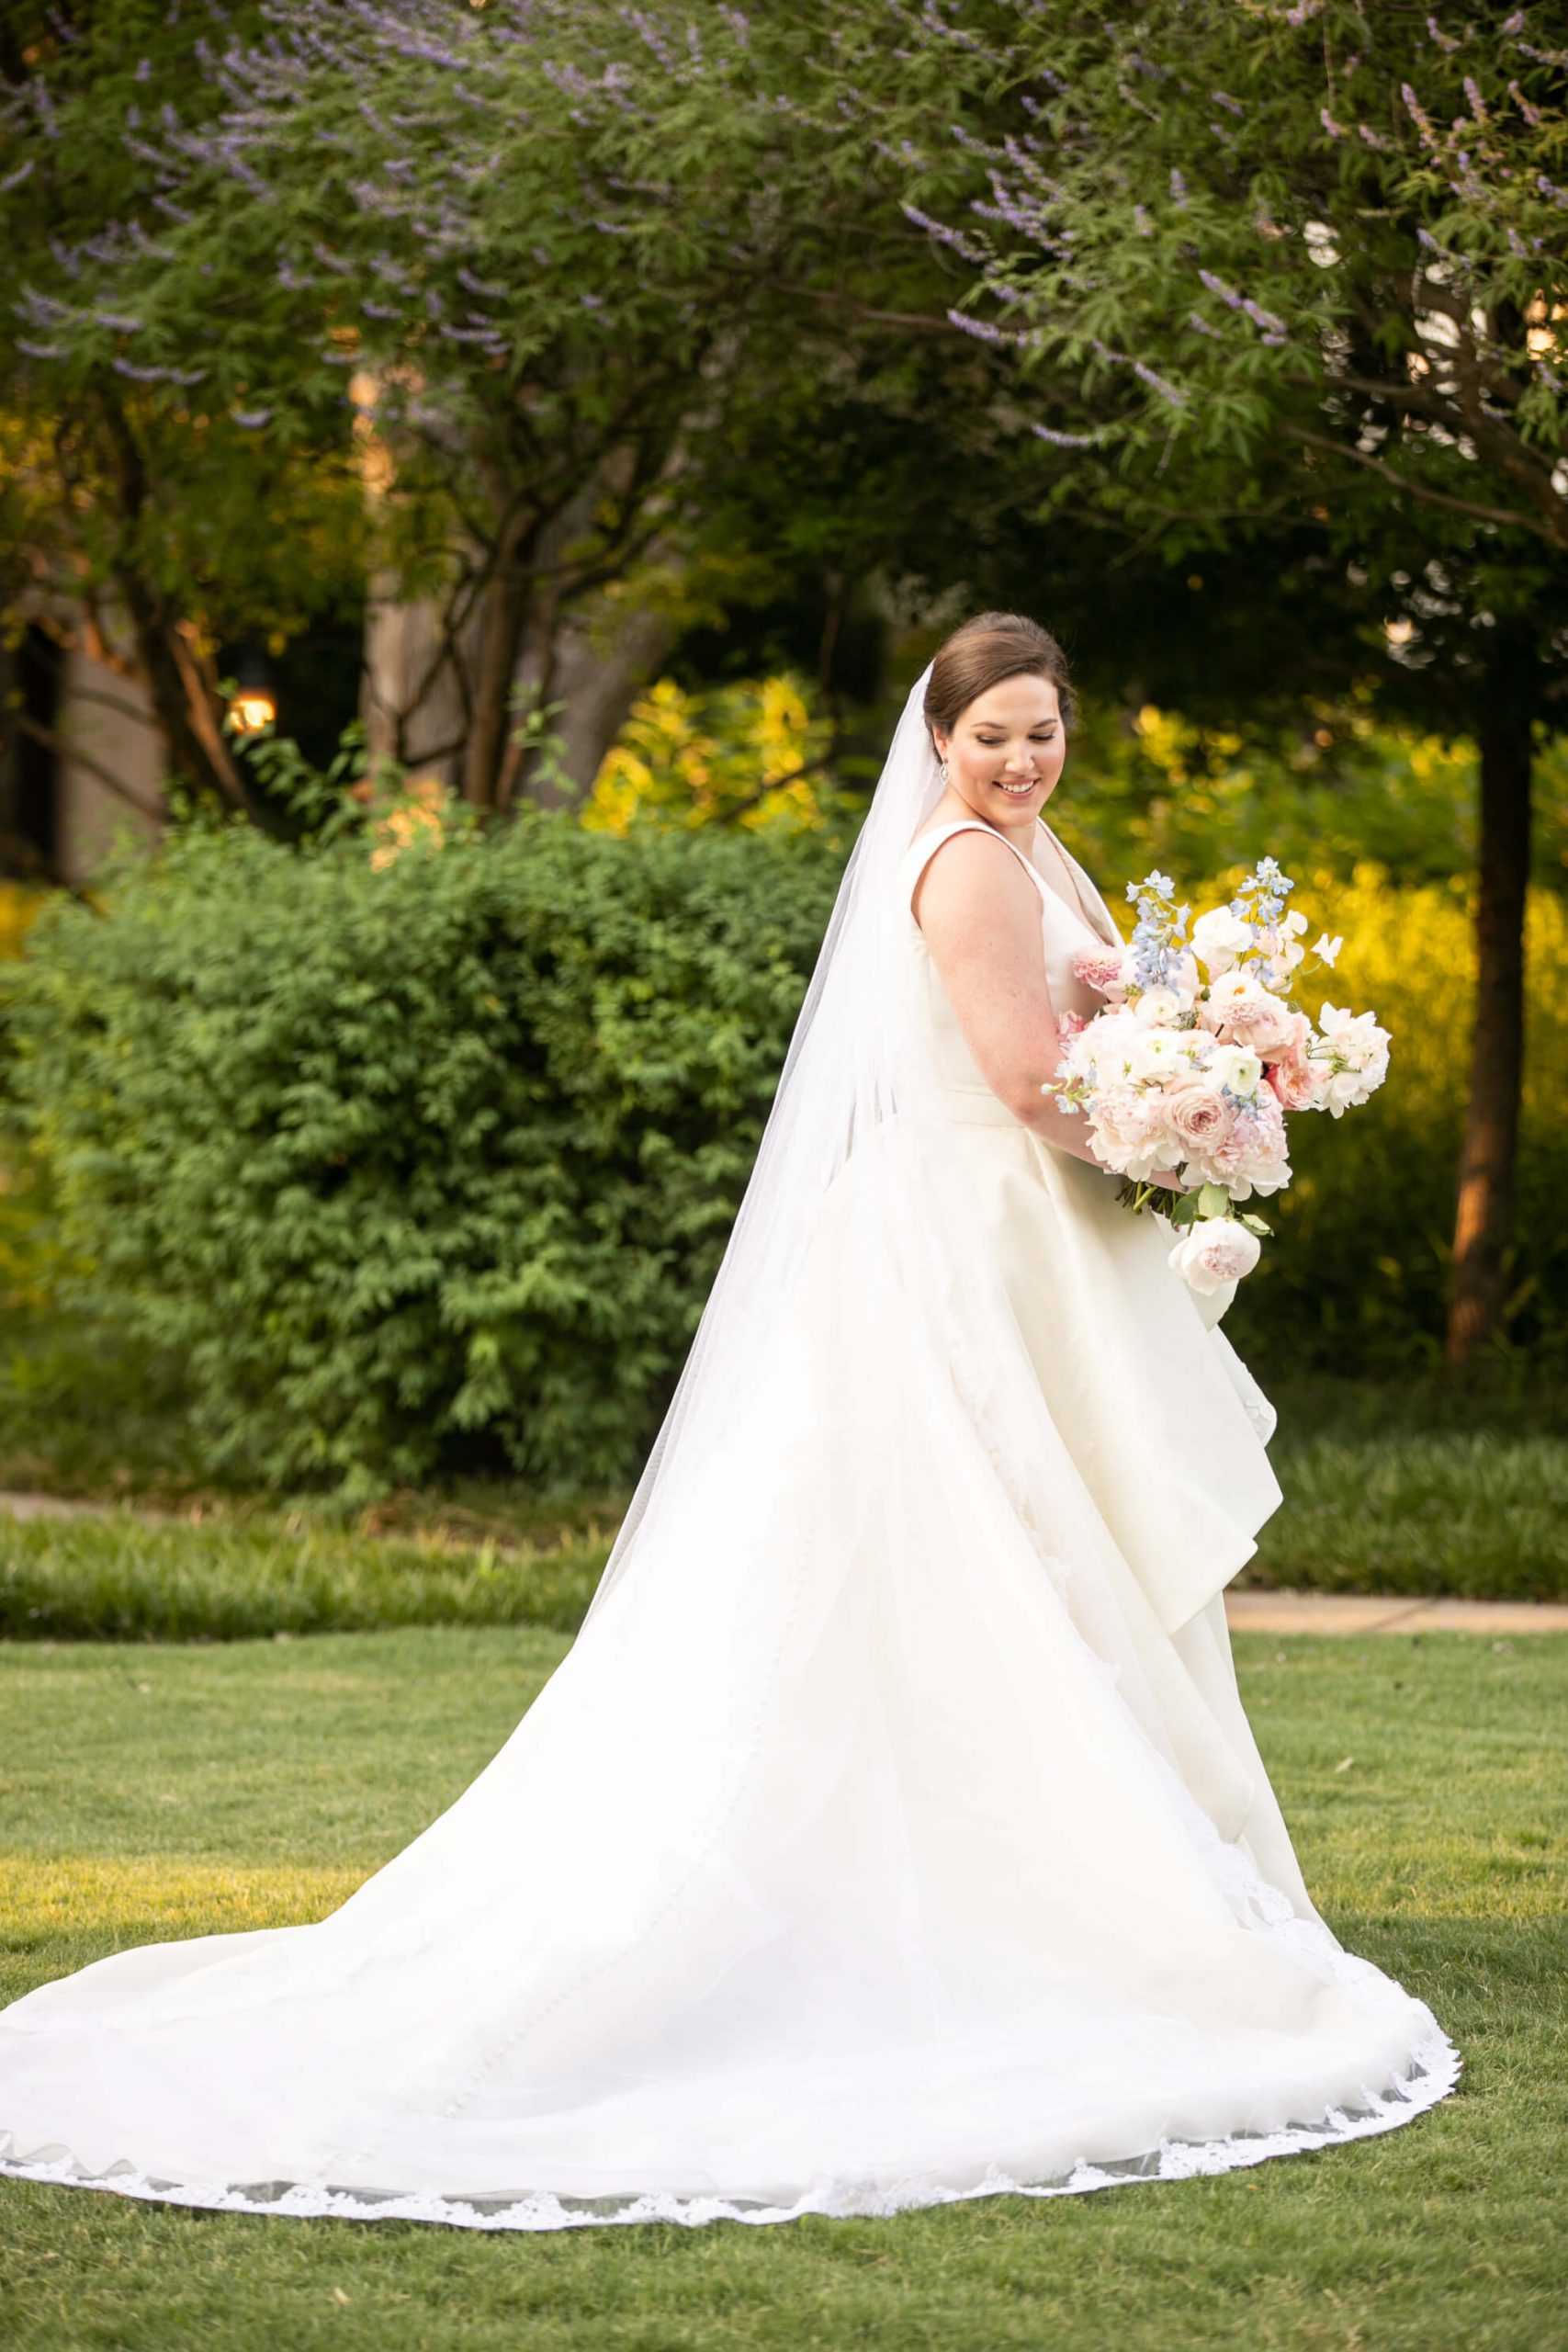 Carole Anne in her bridal gown in a park with bouquet